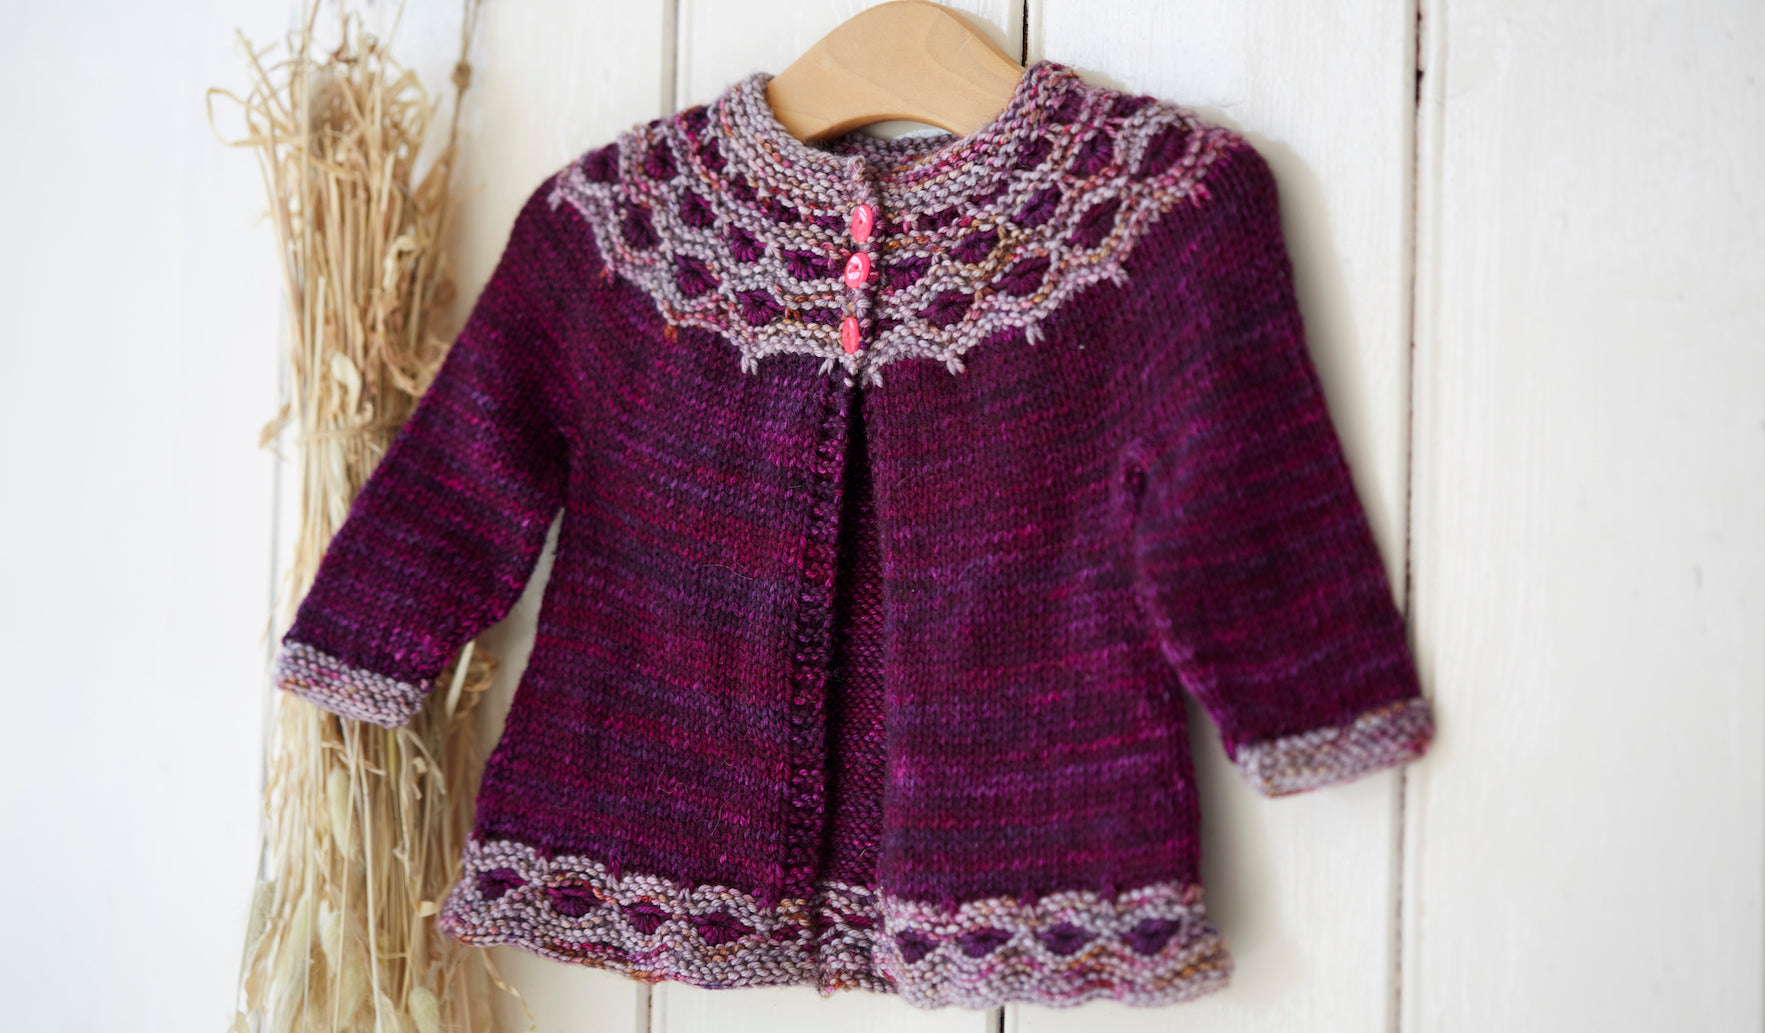 The 15 Best Loop Yarn Patterns and Projects